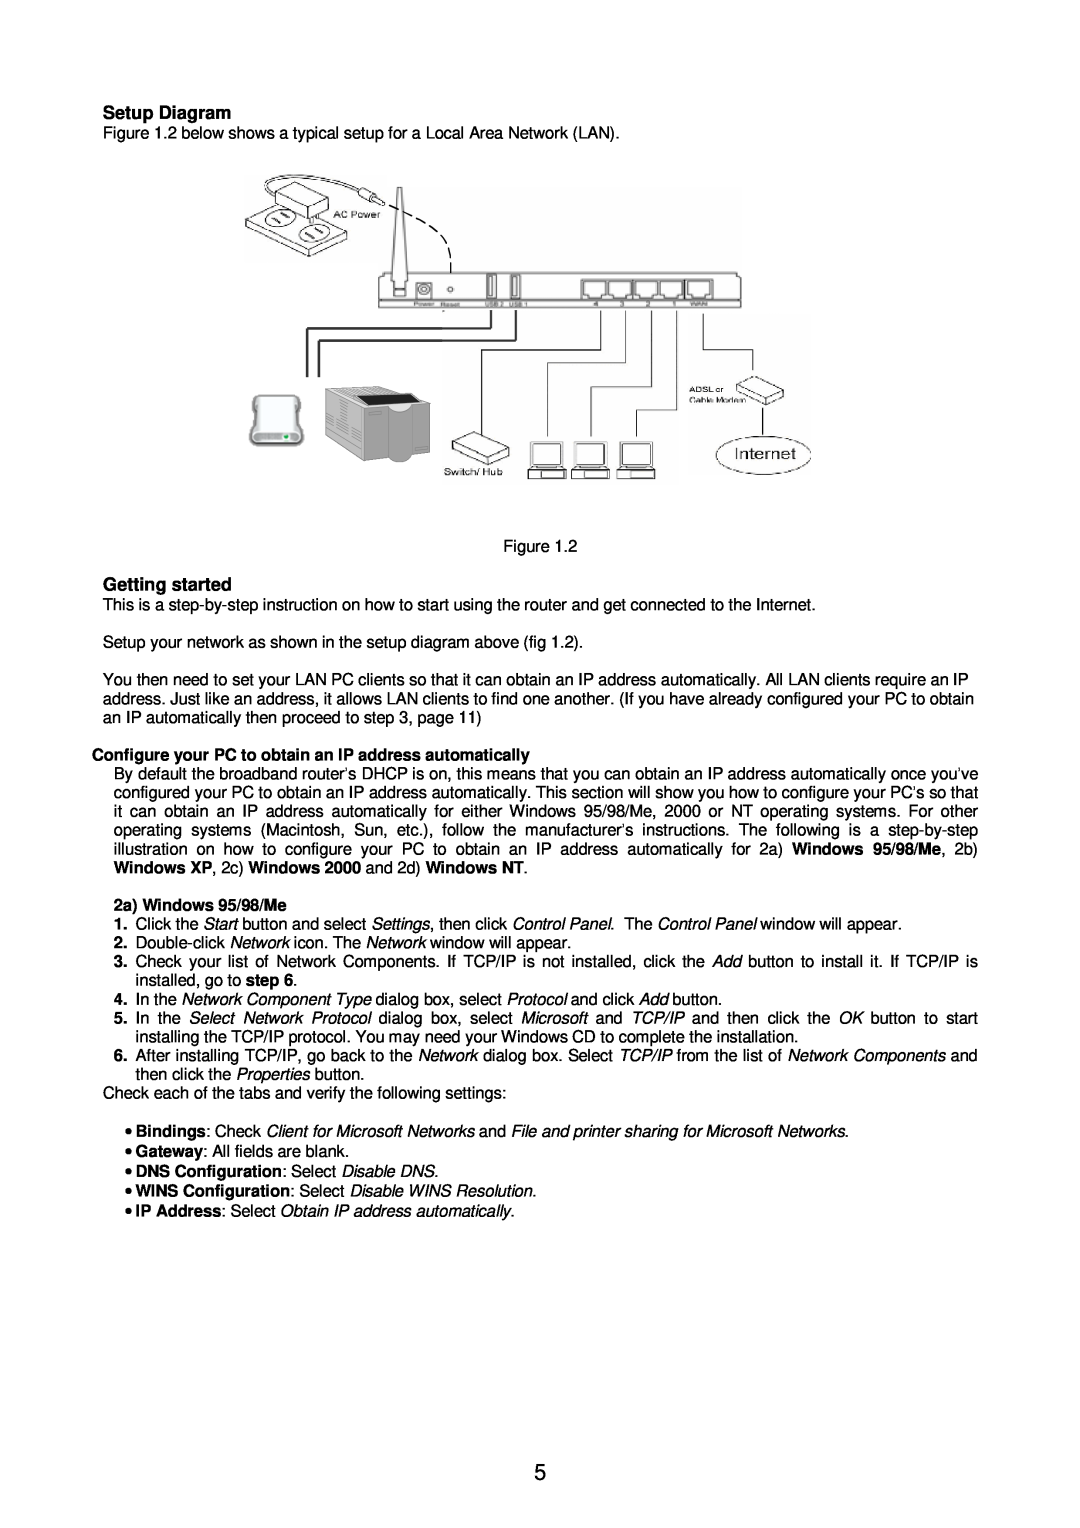 Edimax Technology Broadband Router Setup Diagram, Getting started, Configure your PC to obtain an IP address automatically 